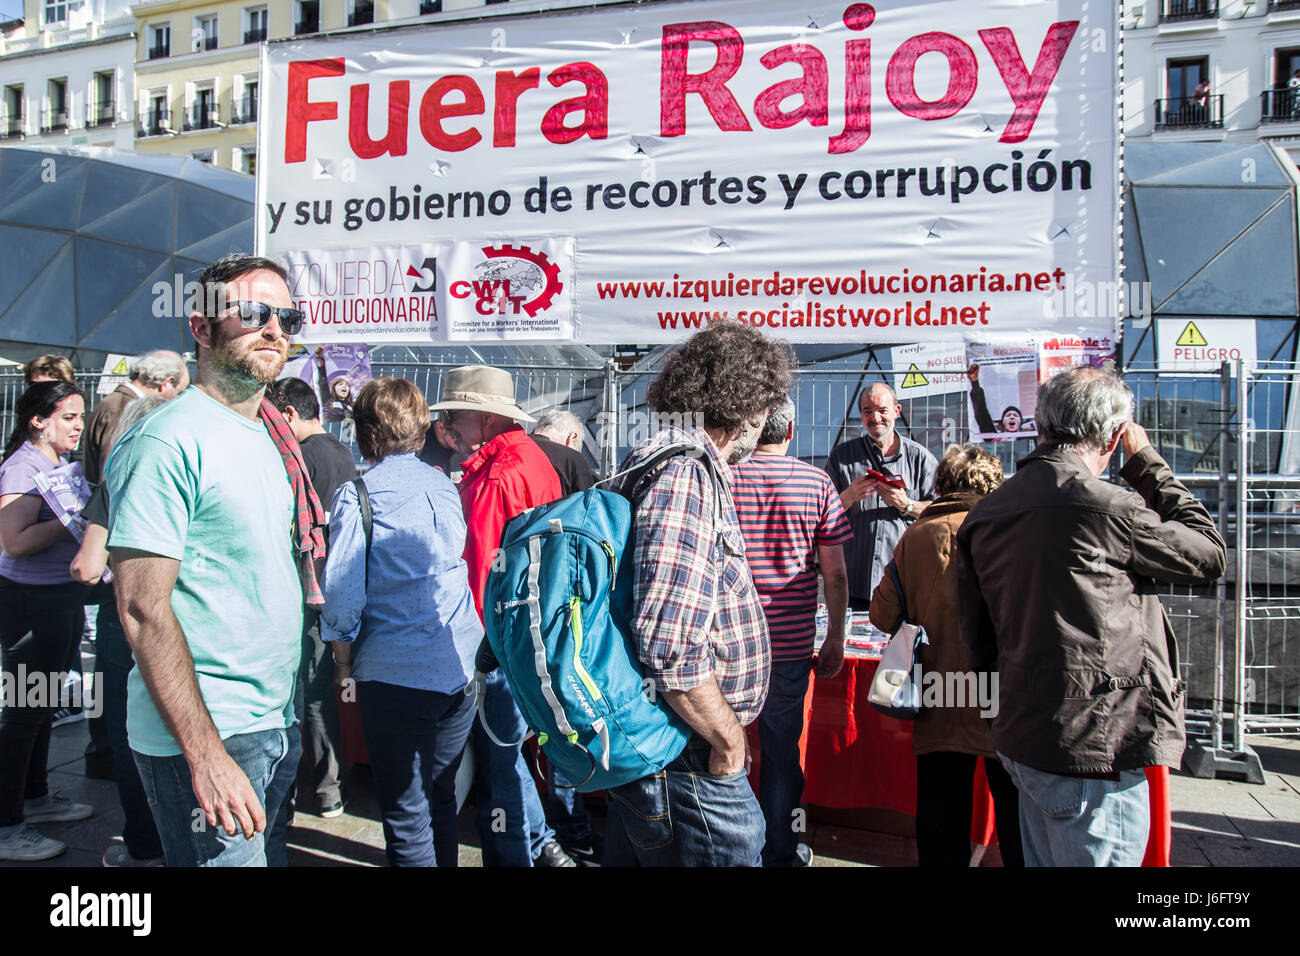 Madrid, Spain. 20th May, 2017. Demonstration in Madrid against the government of Popualr party onthe streets Credit: Alberto Sibaja Ramírez/Alamy Live News Stock Photo